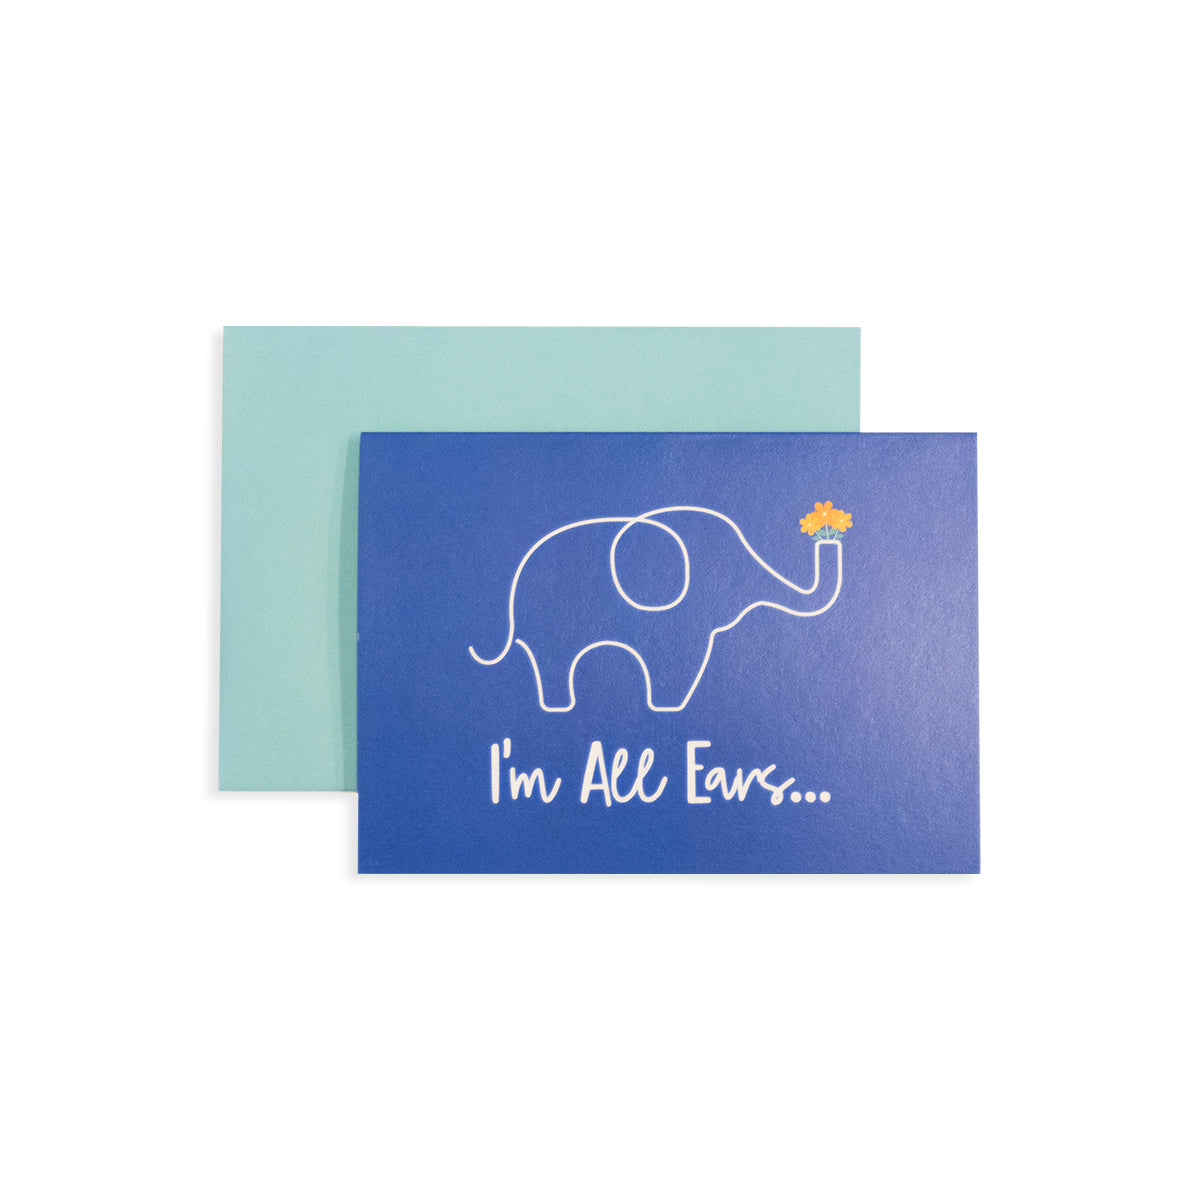 4 1/2" x 6 1/4" blue greeting card with fine line illustration of an elephant and i'm all ears text